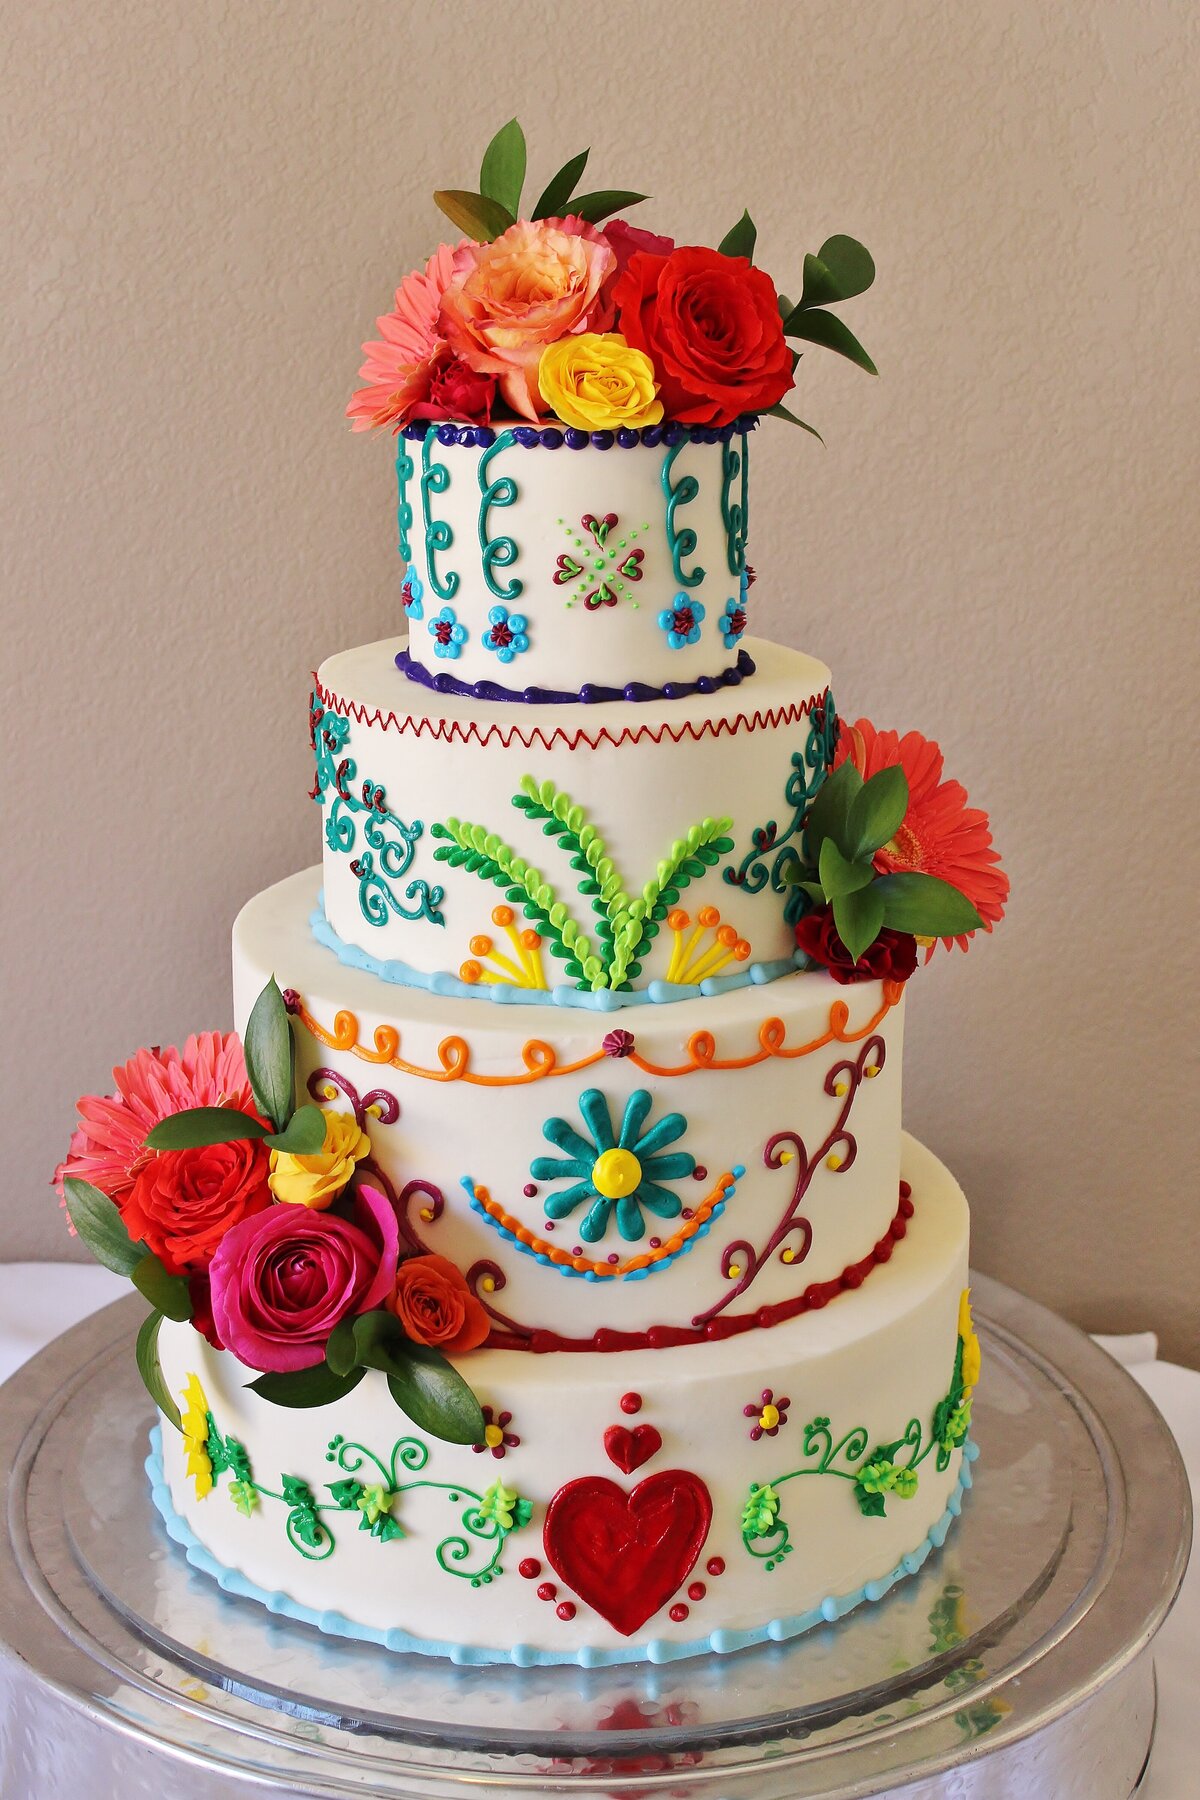 🌺 Mexican Embroidery Cake Inspiration 🌺 REPOST by @kalyscakesandbakes  This Mexican inspired cake is so stunning! It's one of m... | Instagram